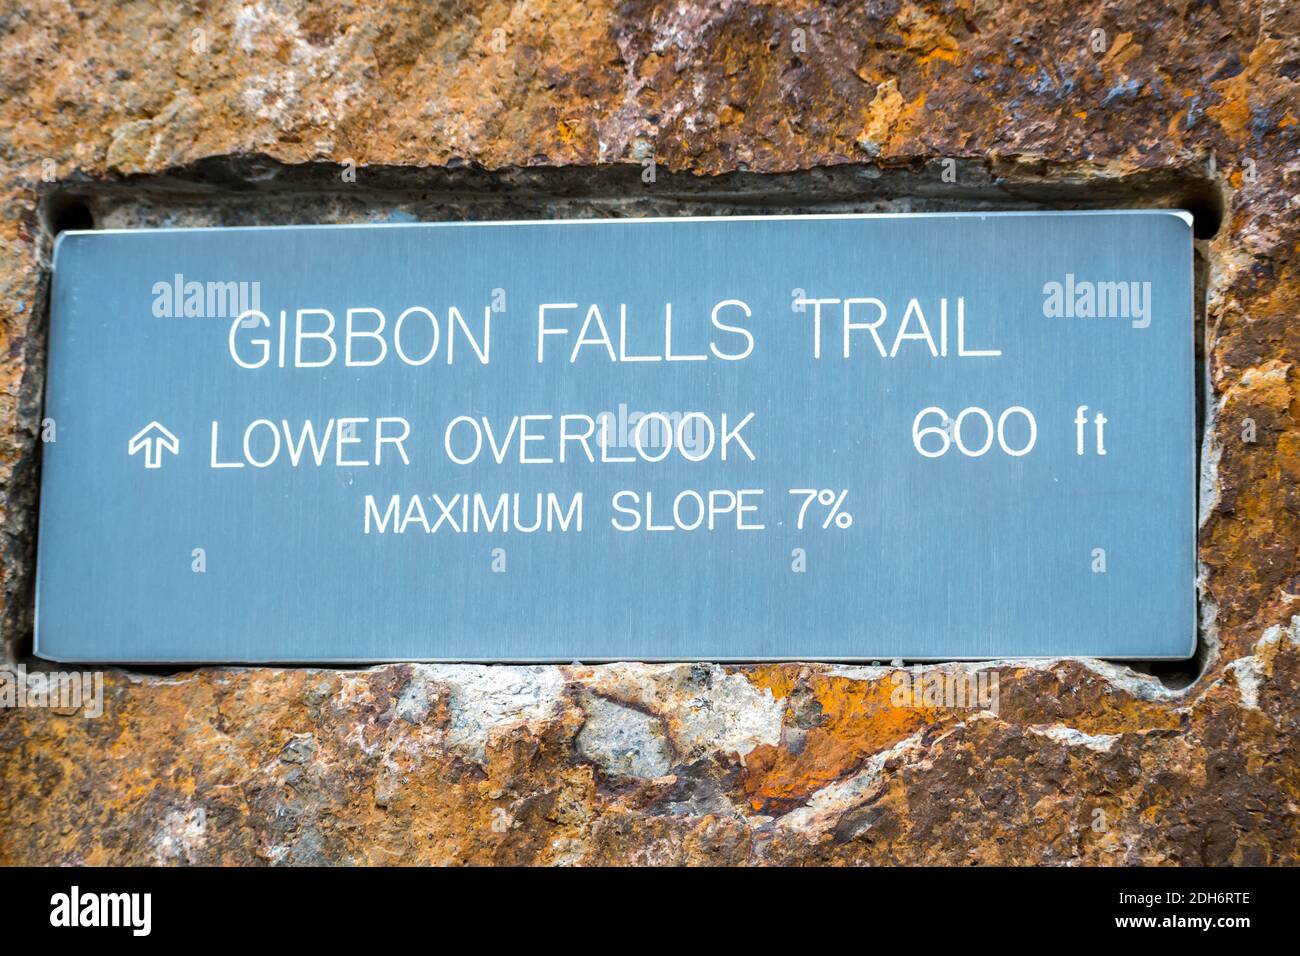 A description board for the trail in Yellowstone National Park, Wyoming Stock Photo